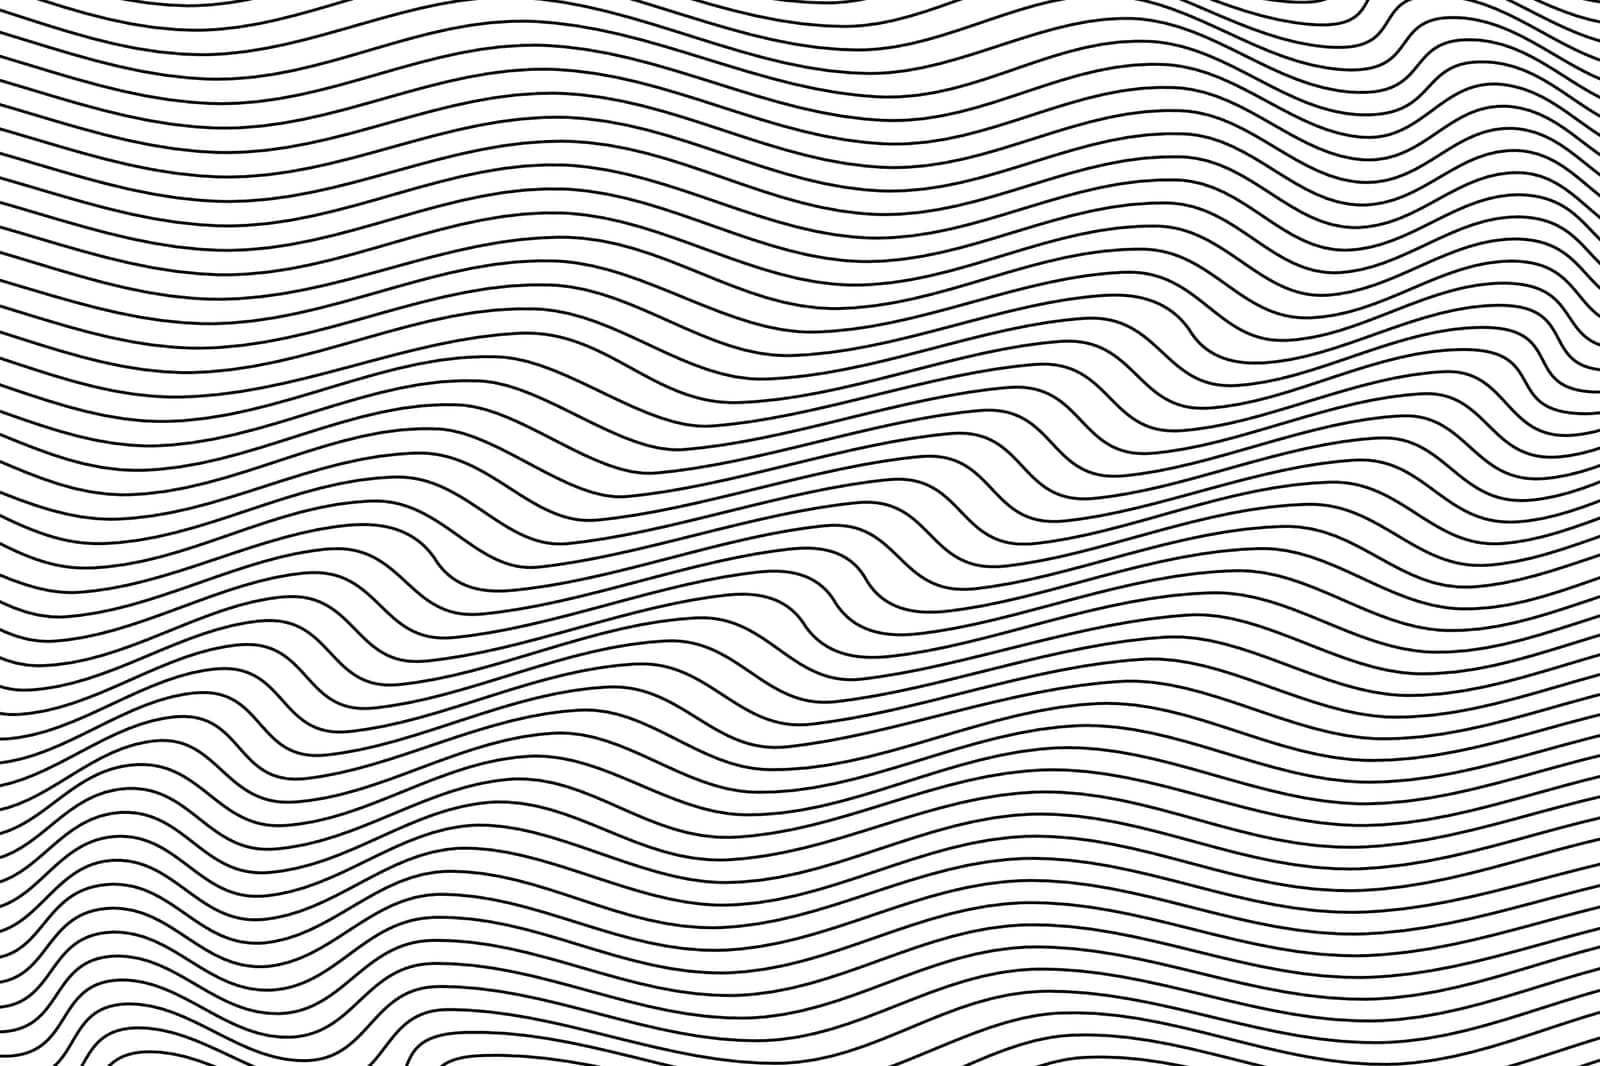 Wave Stripe Background - simple texture for your design. Abstract wavy artistic template. EPS10 vector.